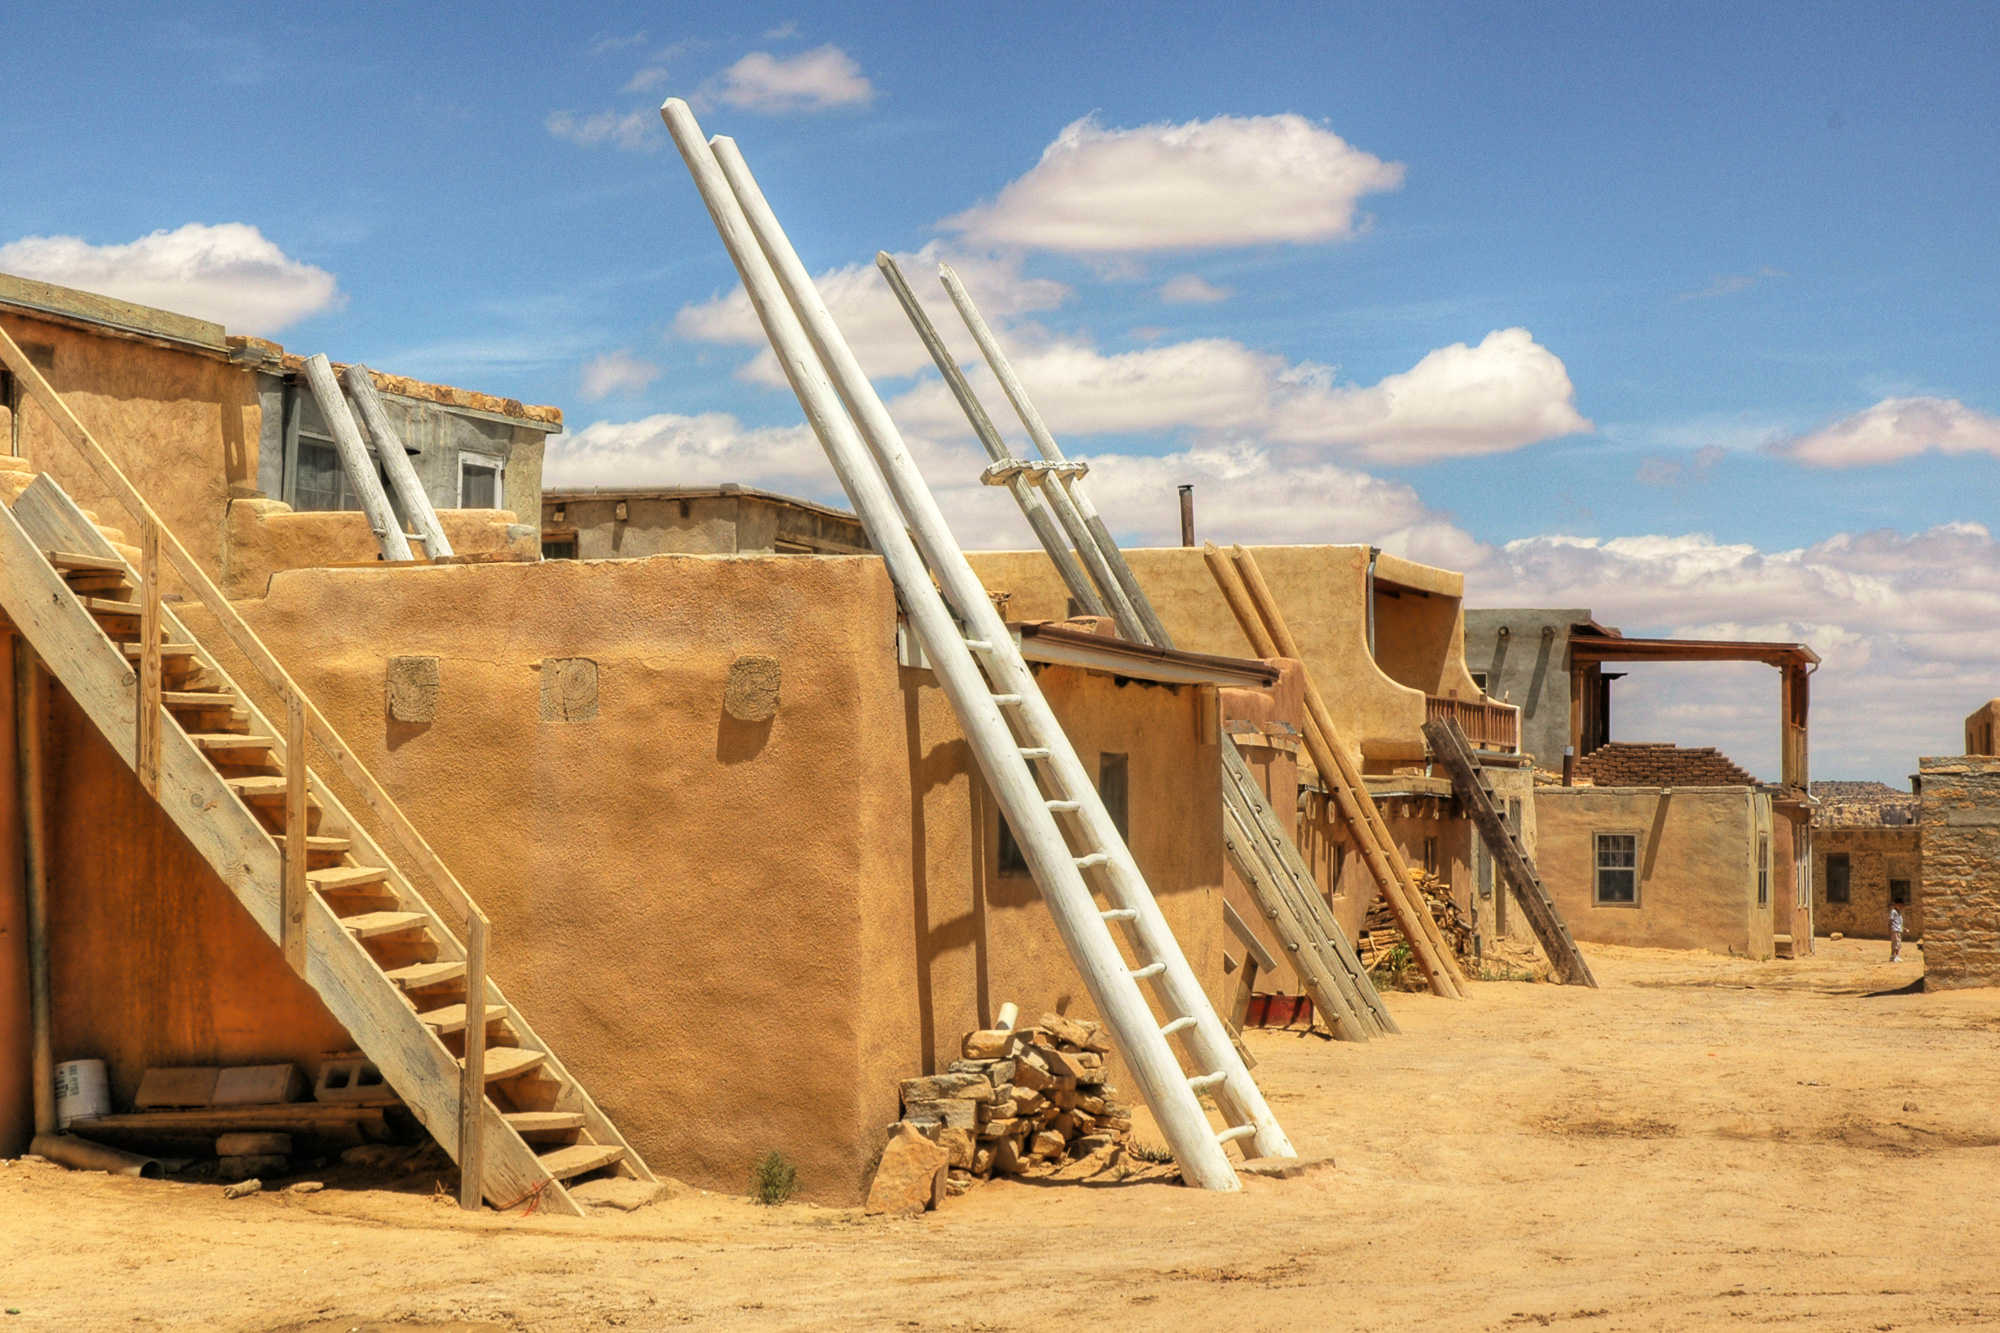 Acoma Street with ladders